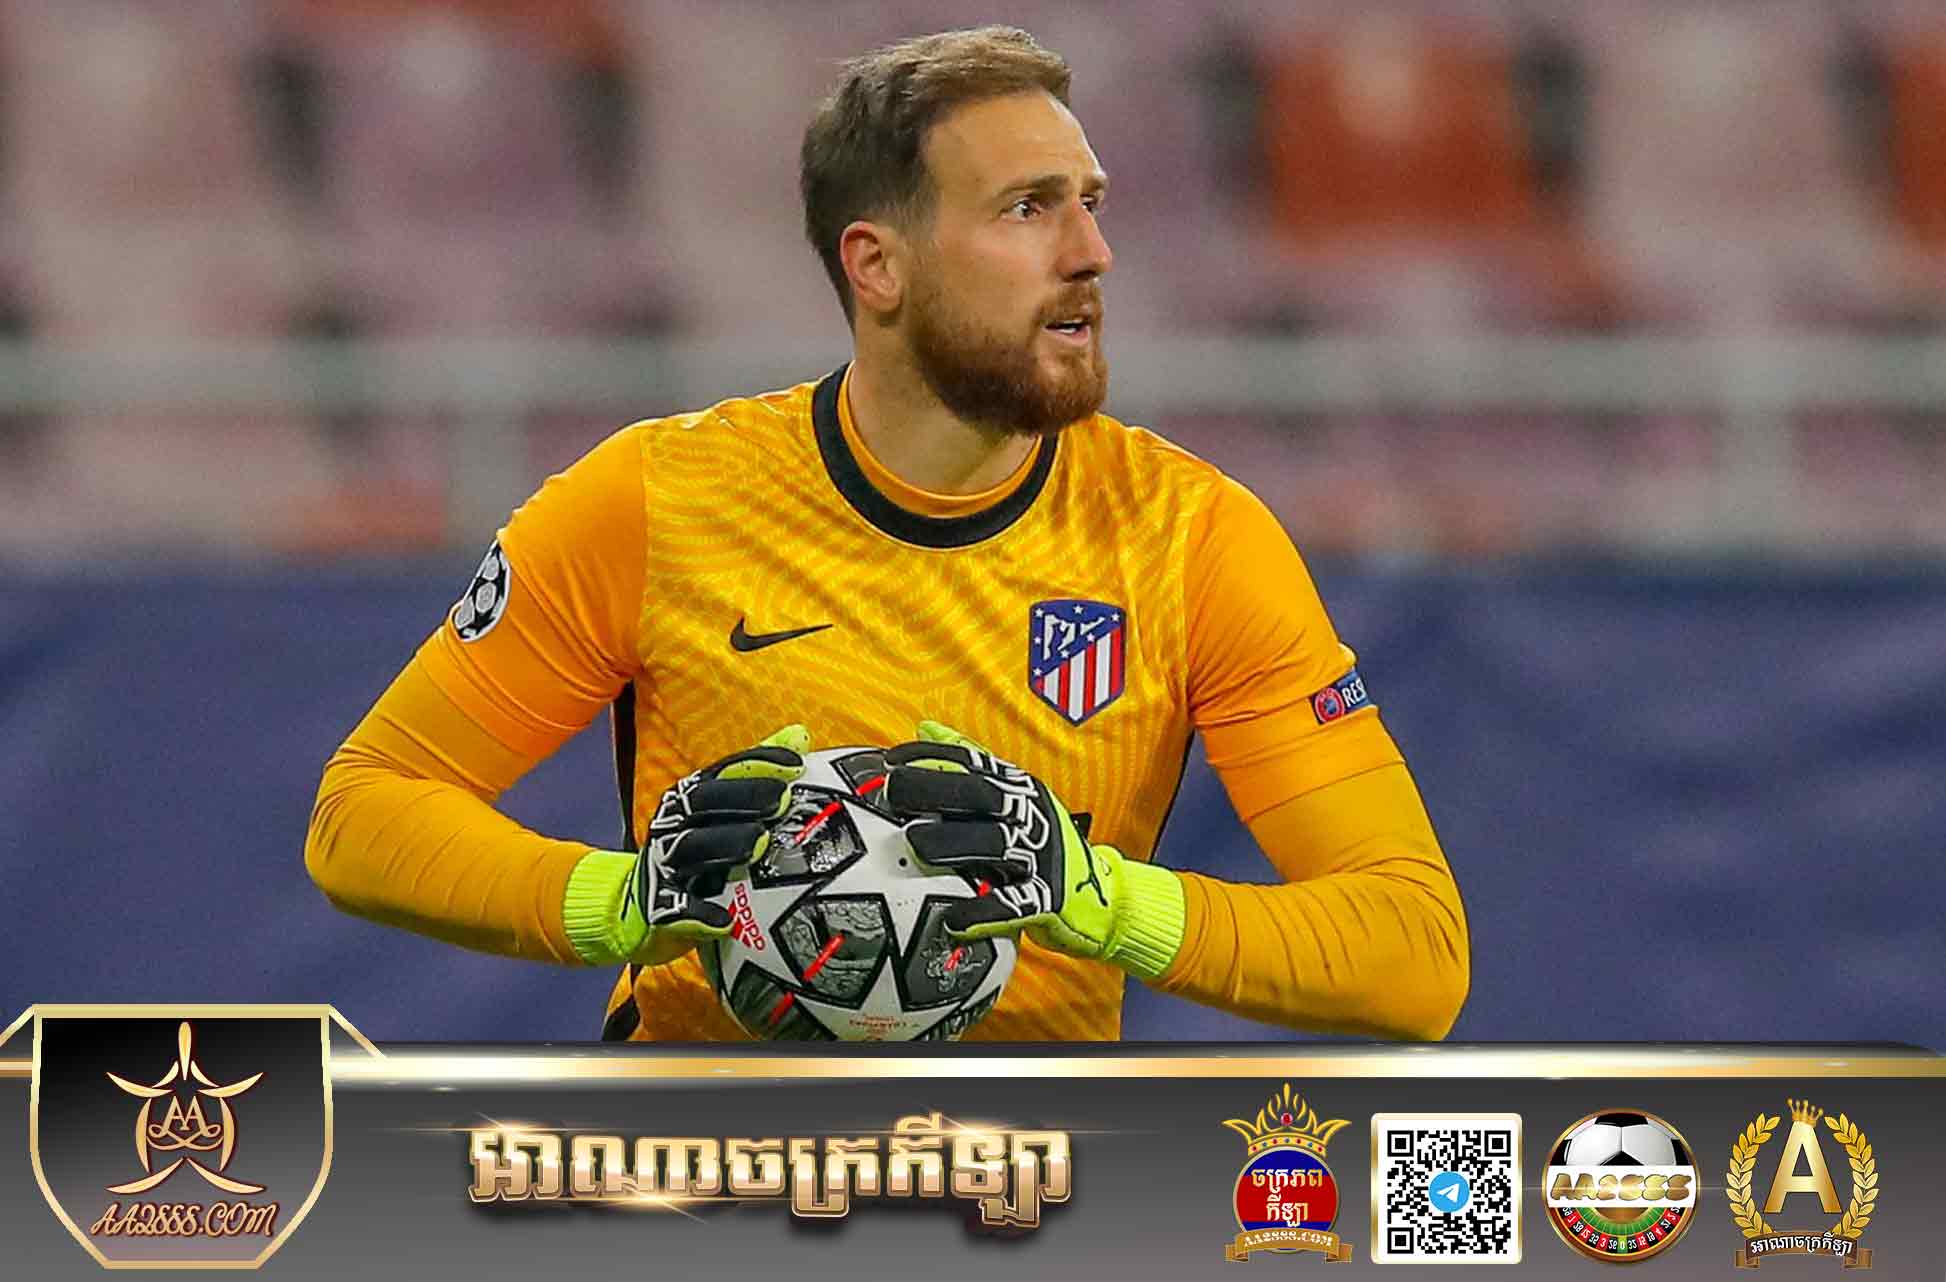 Jan oblak reveal the truth why At-Madrid lost derby 